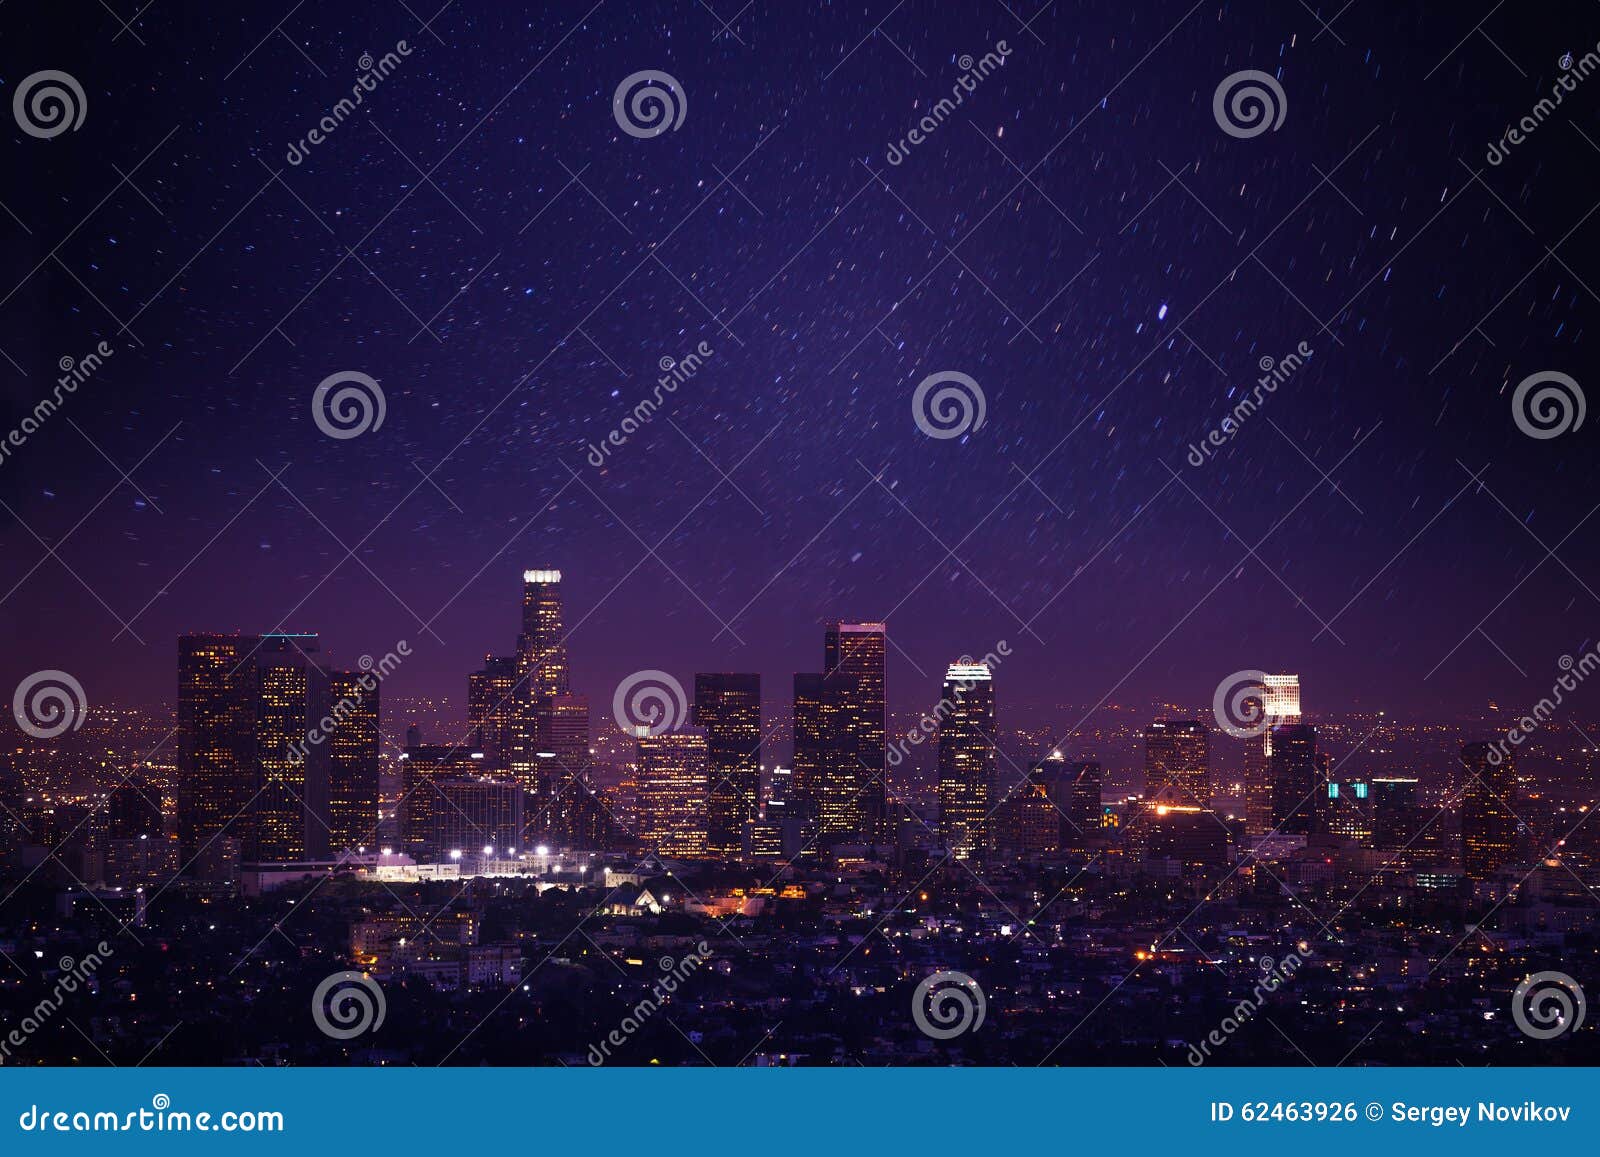 beautiful night cityscape view of los angeles, us